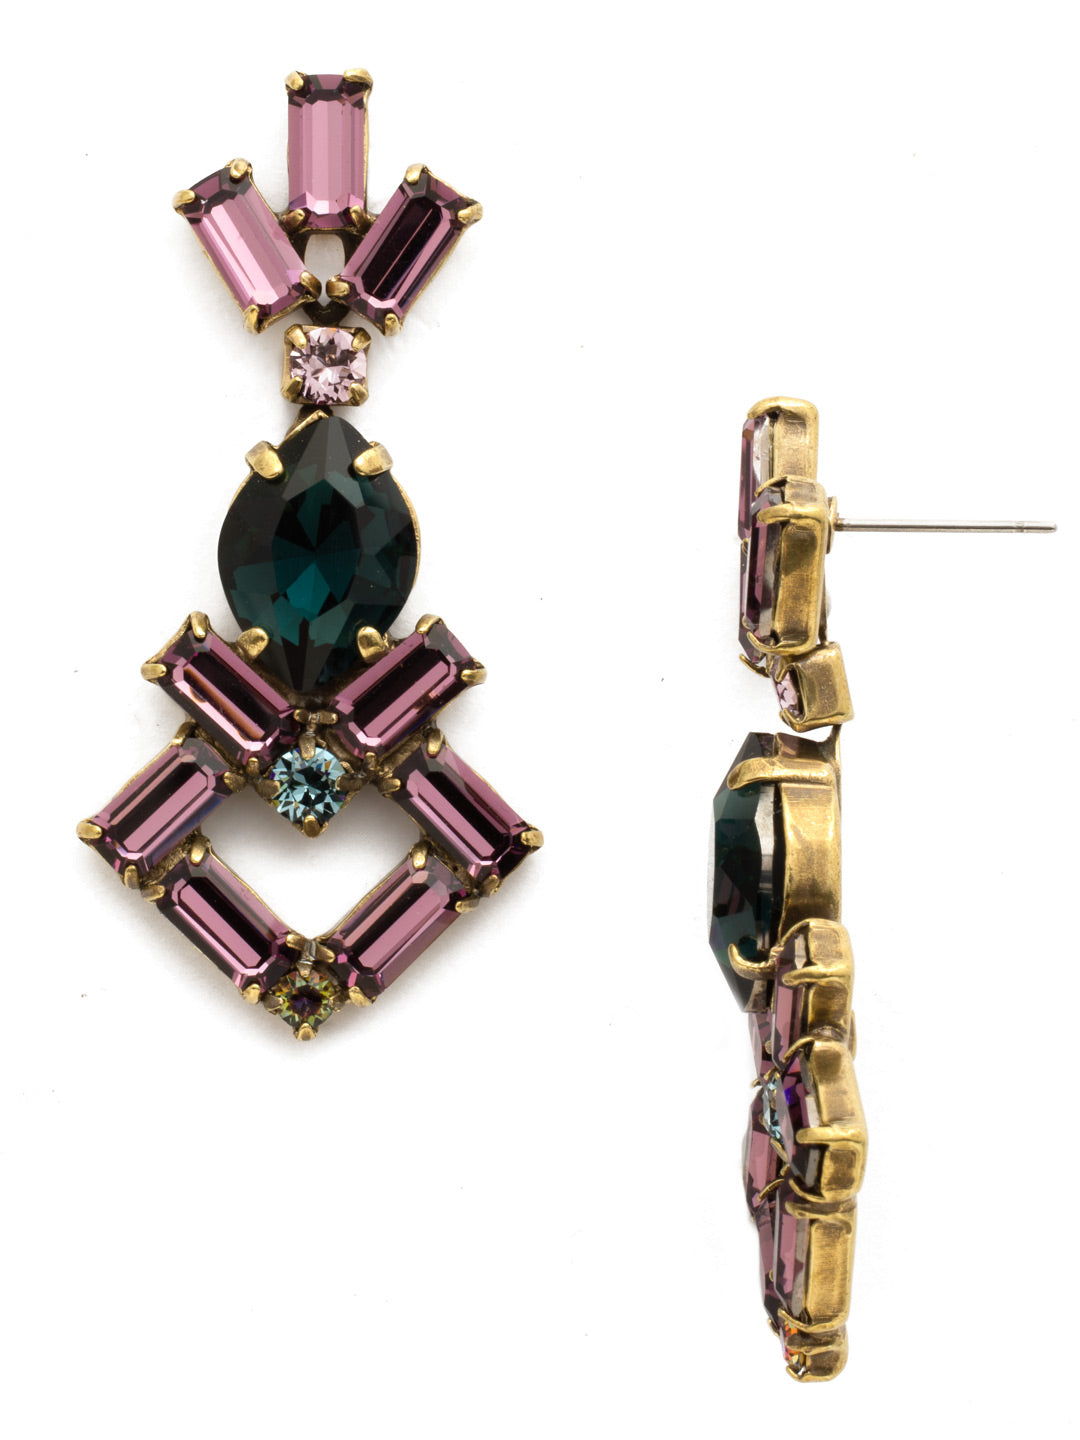 Artisanal Dangle Earrings - EDK42AGROP - This unique design includes a large central oval crystal outlined with a ray of baguette and round crystals. This earring will be sure to make a statement with its exotic style. From Sorrelli's Royal Plum collection in our Antique Gold-tone finish.